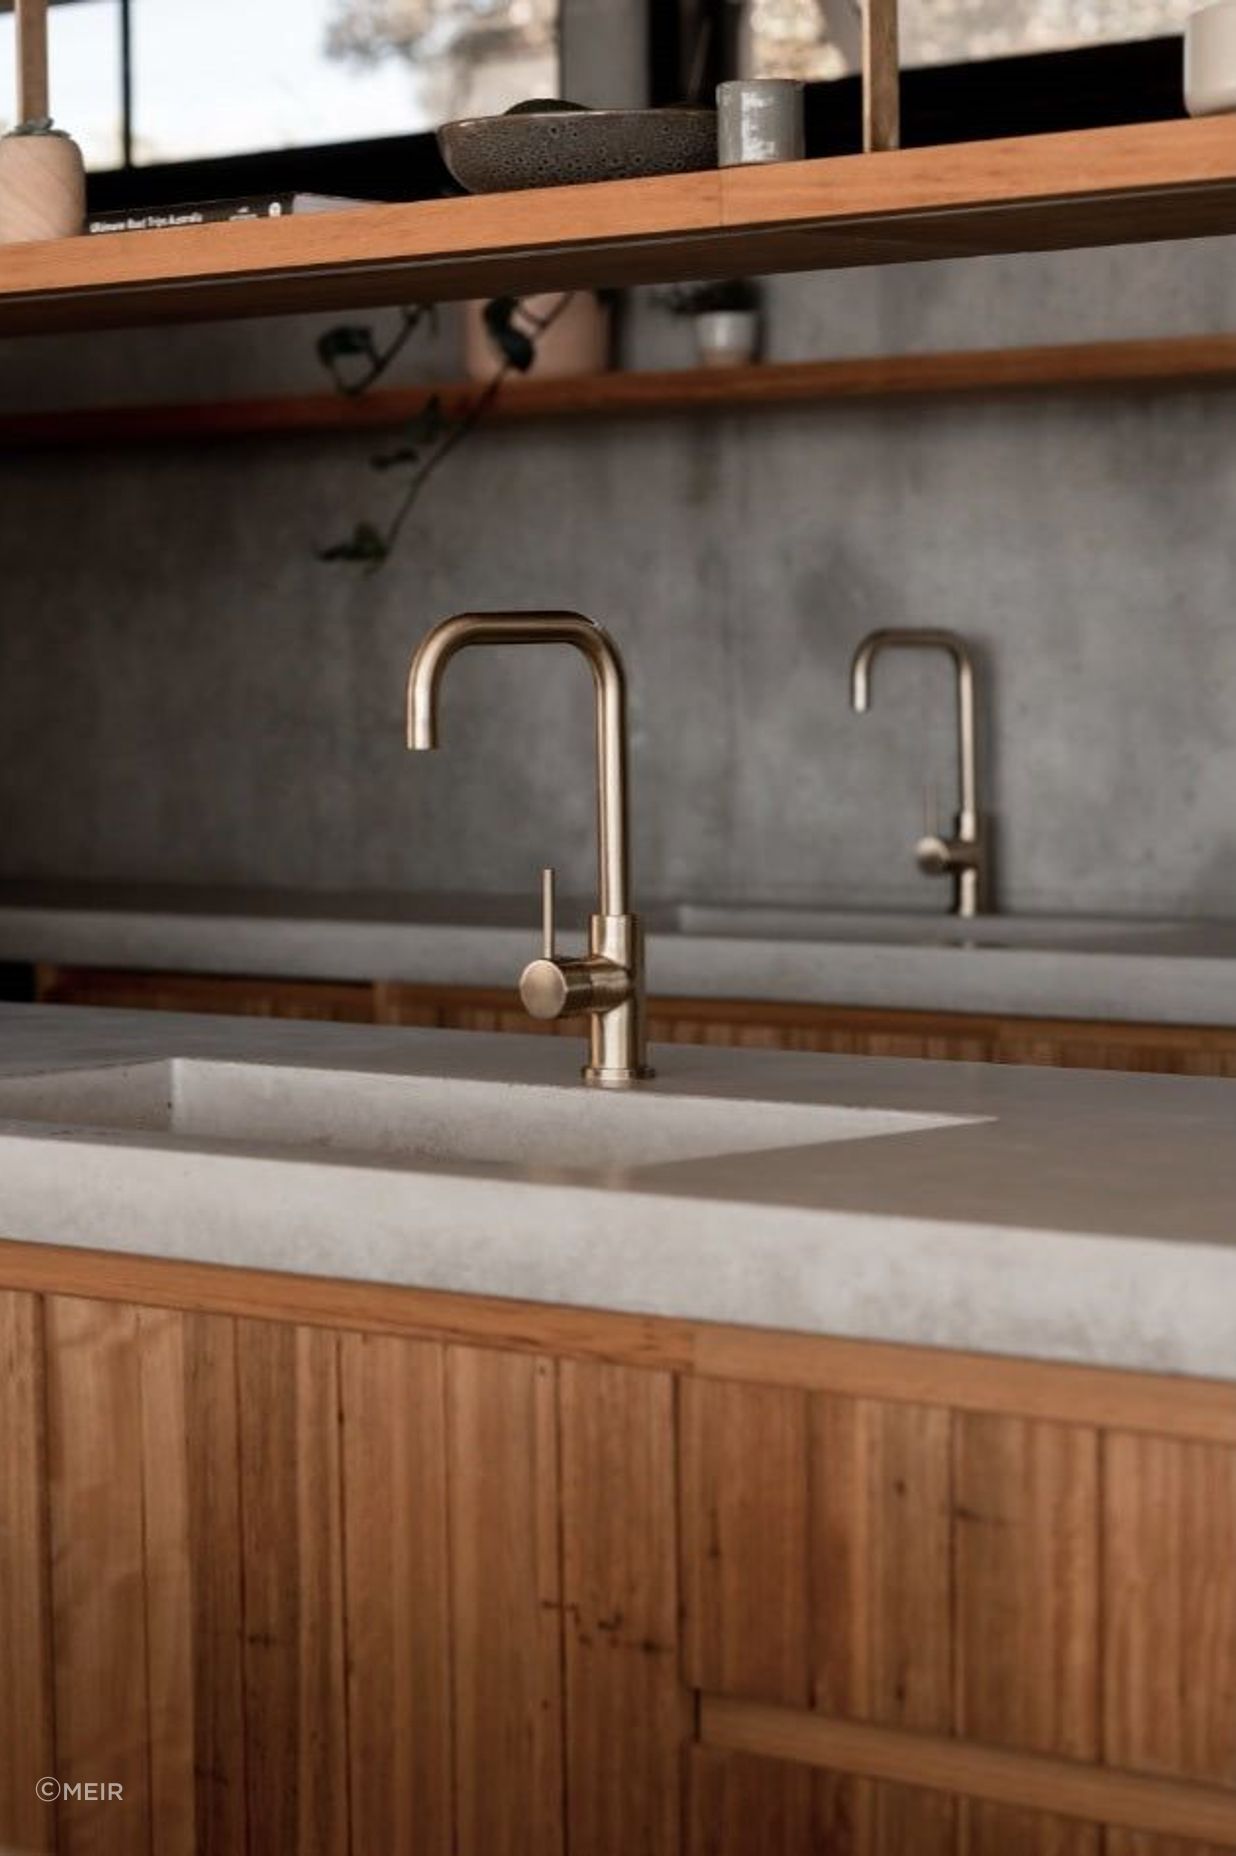 Modern kitchen mixer taps, allow for precise temperature control by blending hot and cold water sources.